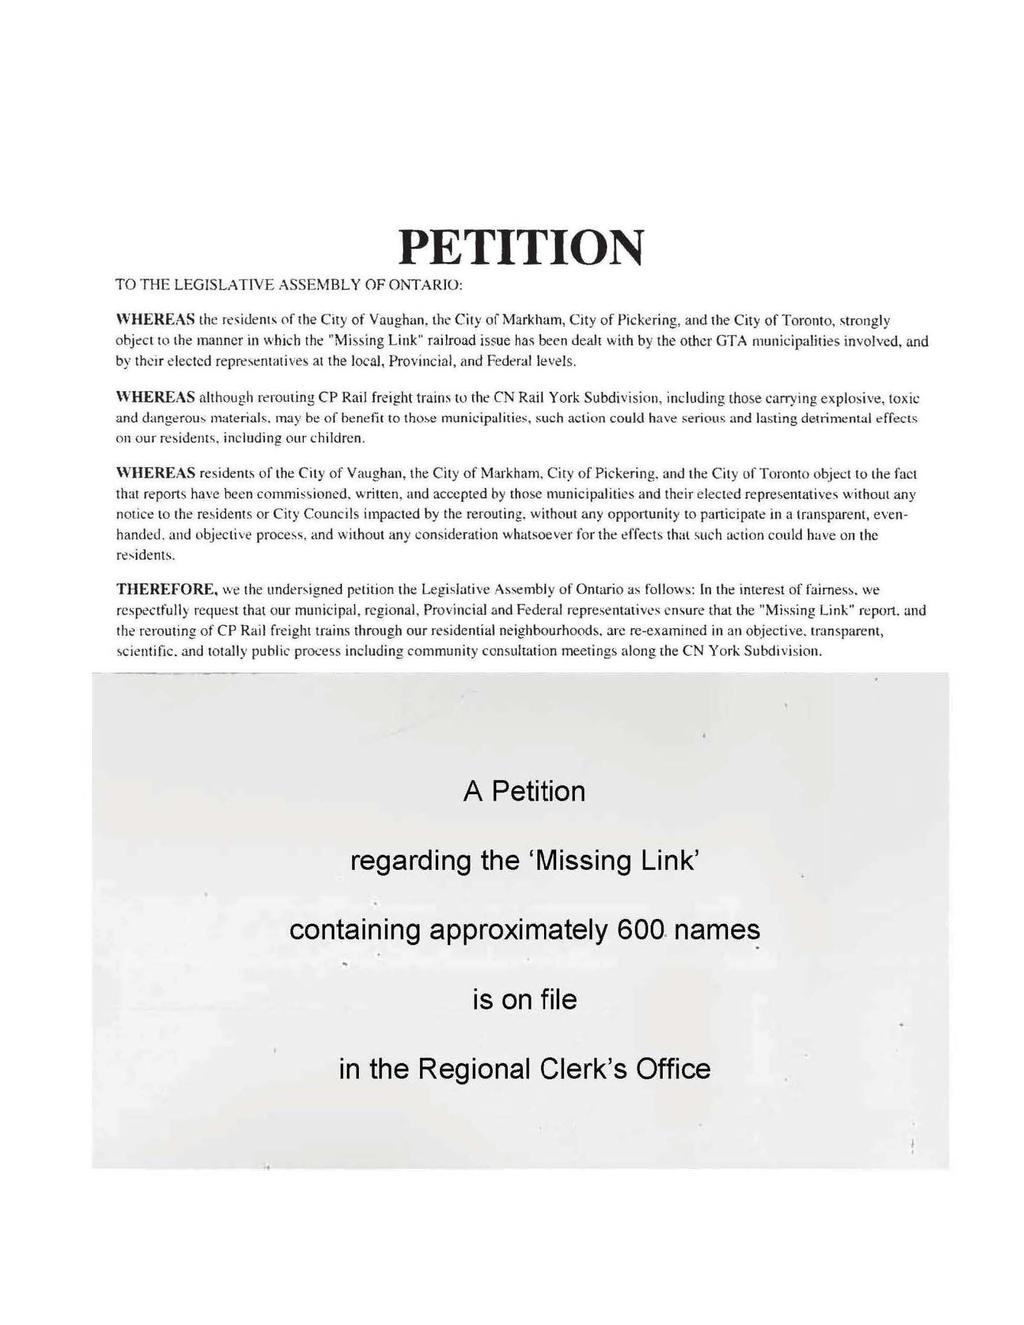 PETITION TO THE LEGISLATIVE ASSEMBLY OF ONTARIO: WHEREAS the r~ s ide nt ): 0f the City of Vaughan, th~ City of Markham, City of Pick~ring, and the City of Toronto,.